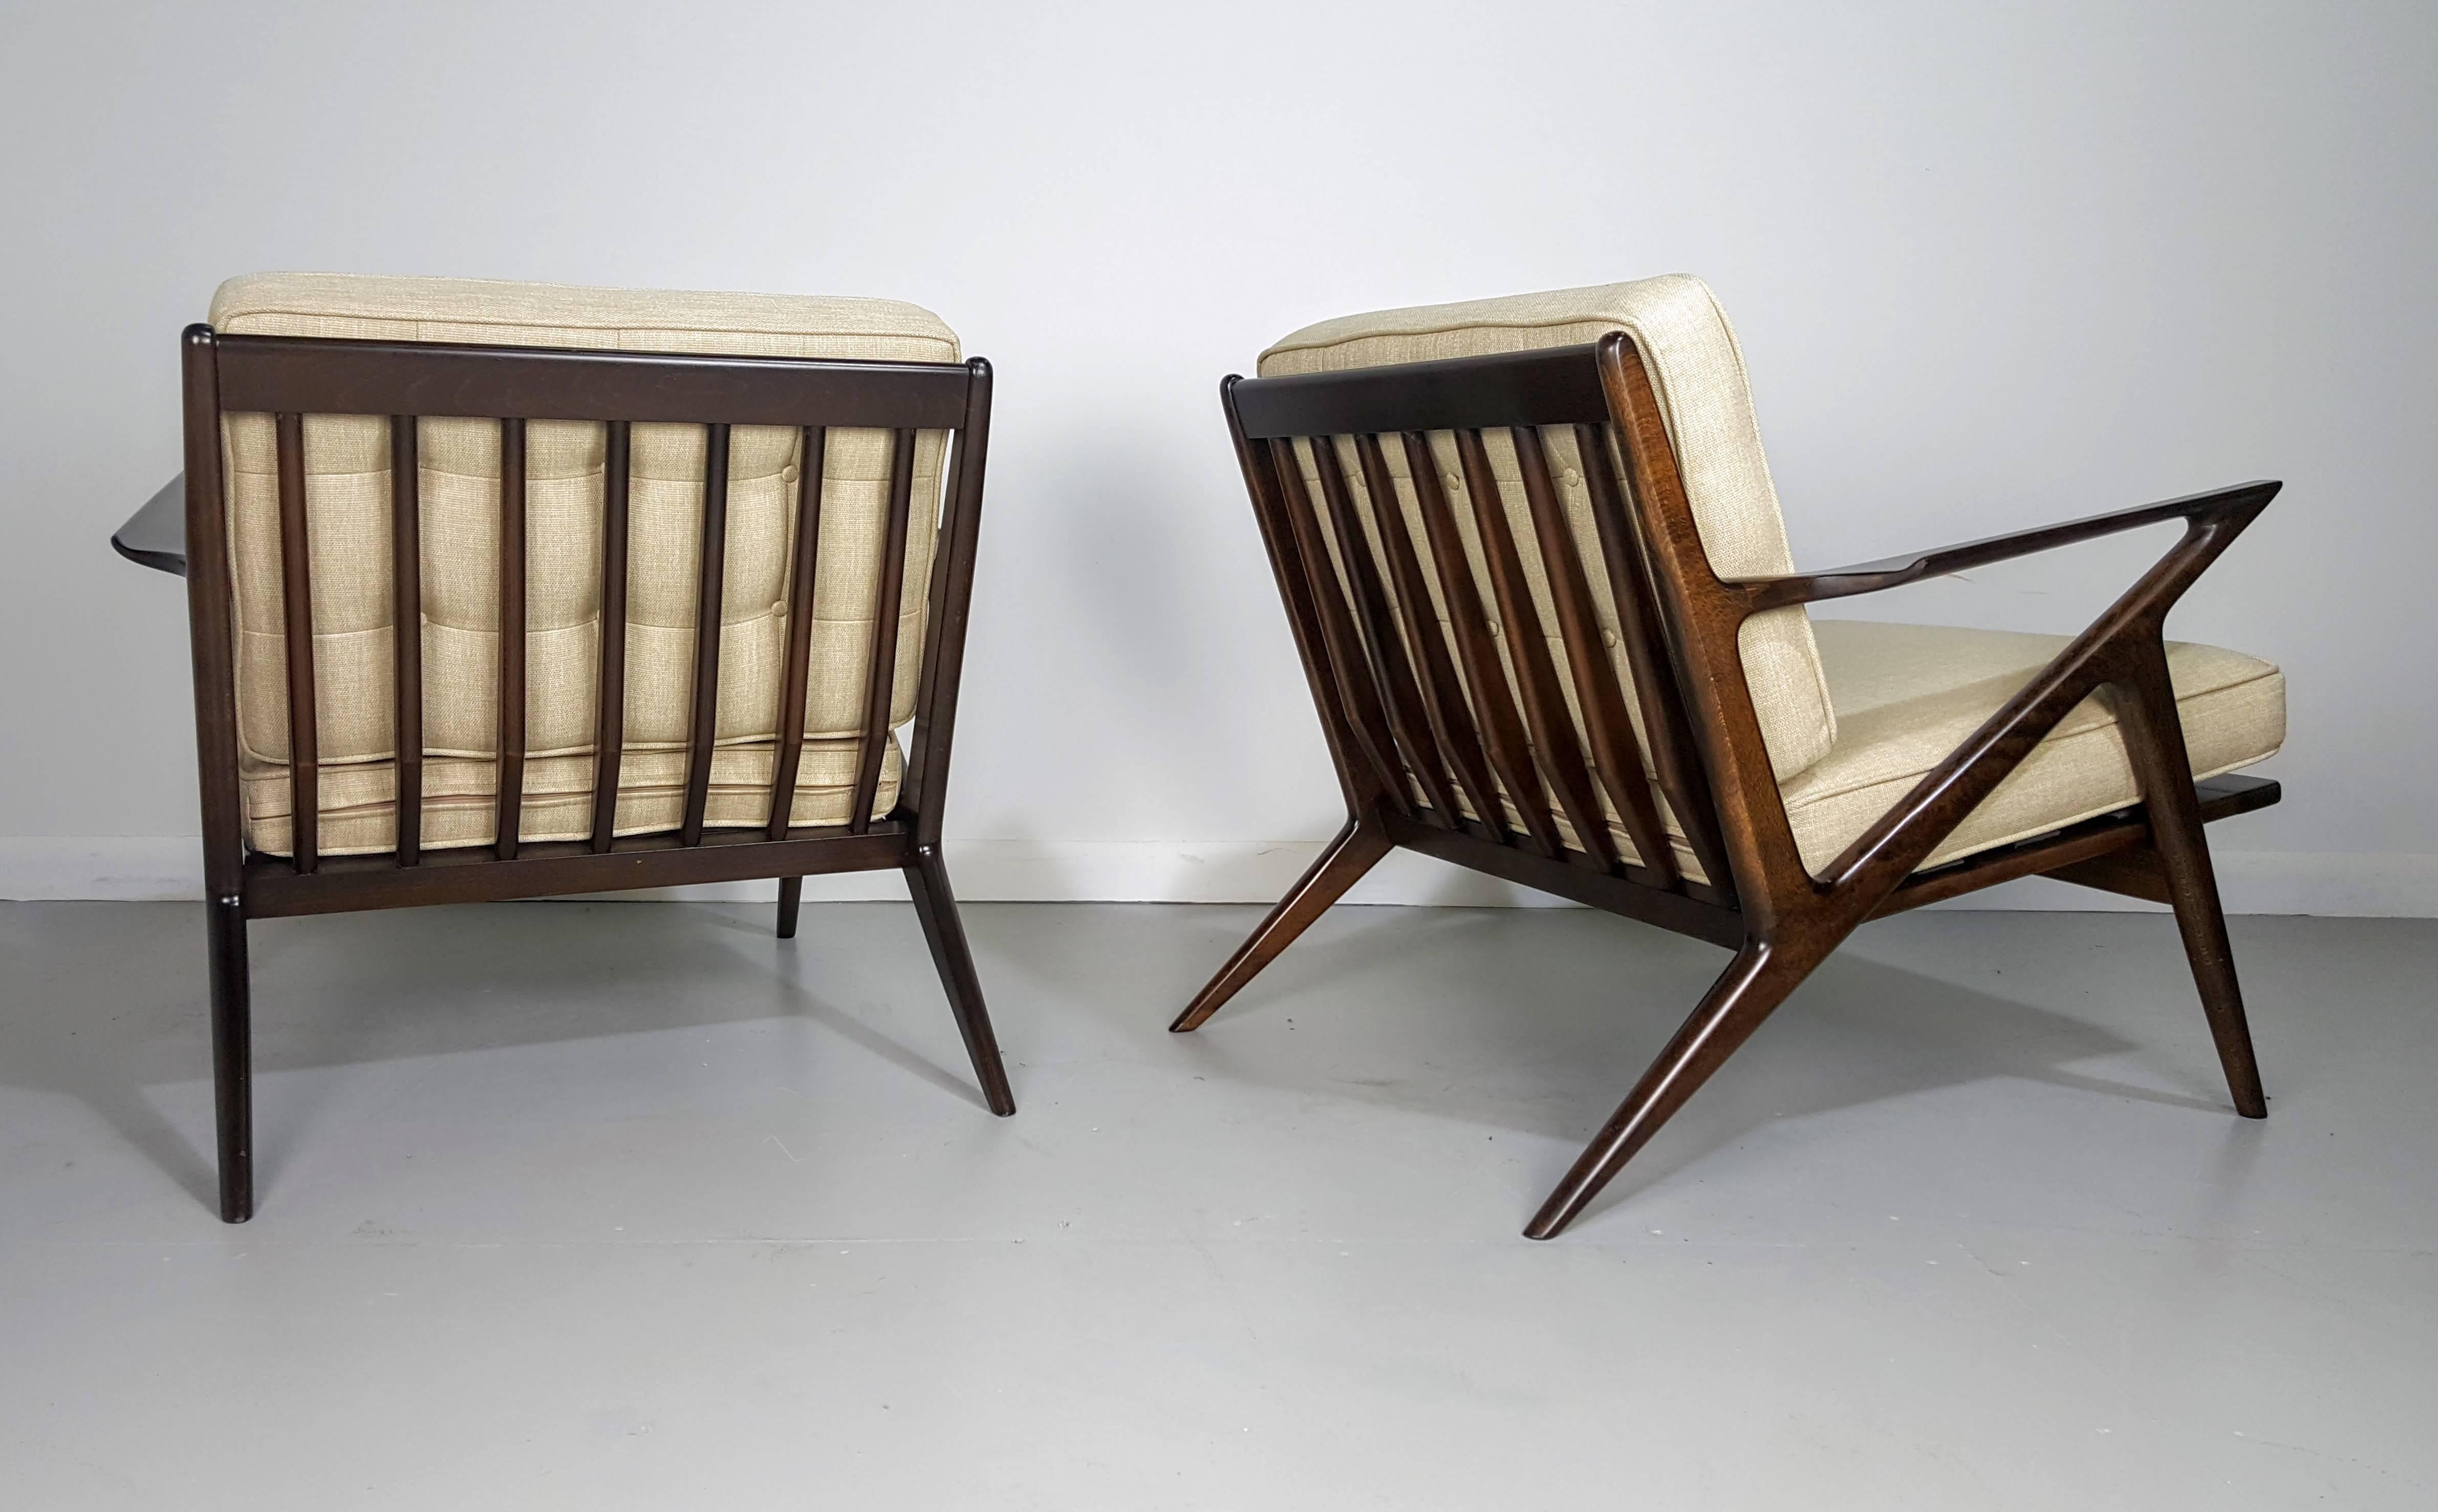 Mid-20th Century Pair of Sculptural Lounge Chairs by Poul Jensen for Selig, Denmark 1950s